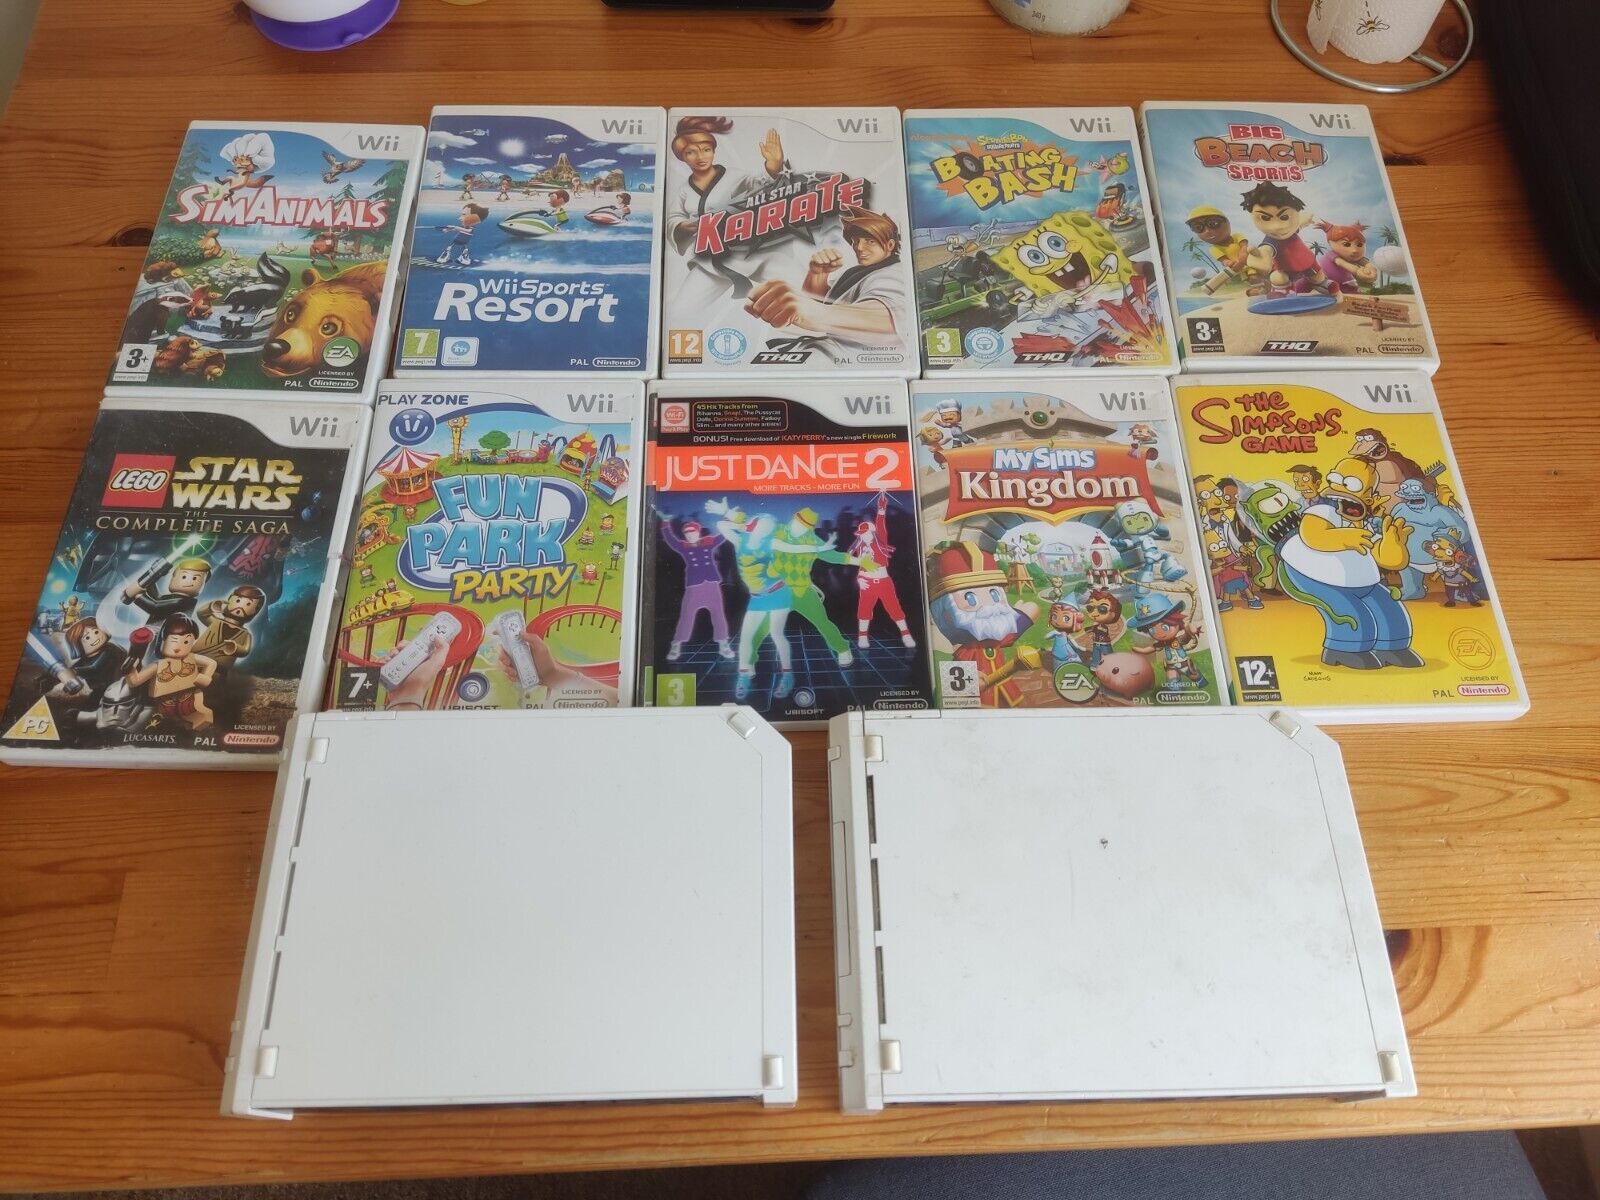 2 Nintendo Wii Console White RVL-001 (Bundle with 10 Games) - Tested